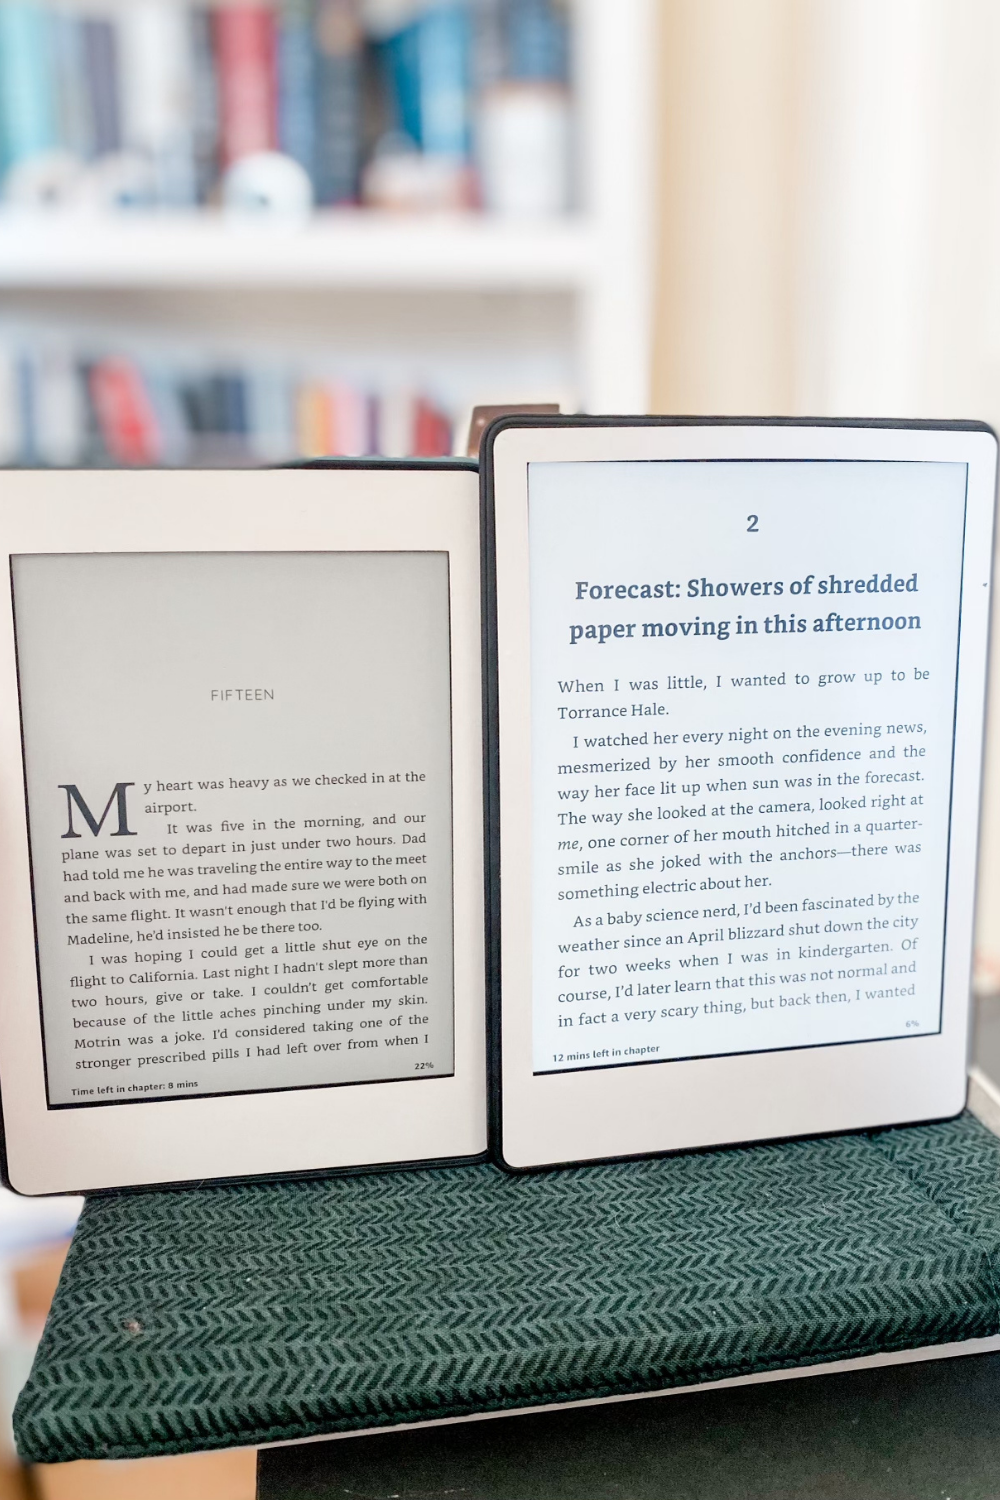 Kindle Paperwhite Signature Edition - Rekindle your love of reading  - Digital Reviews Network